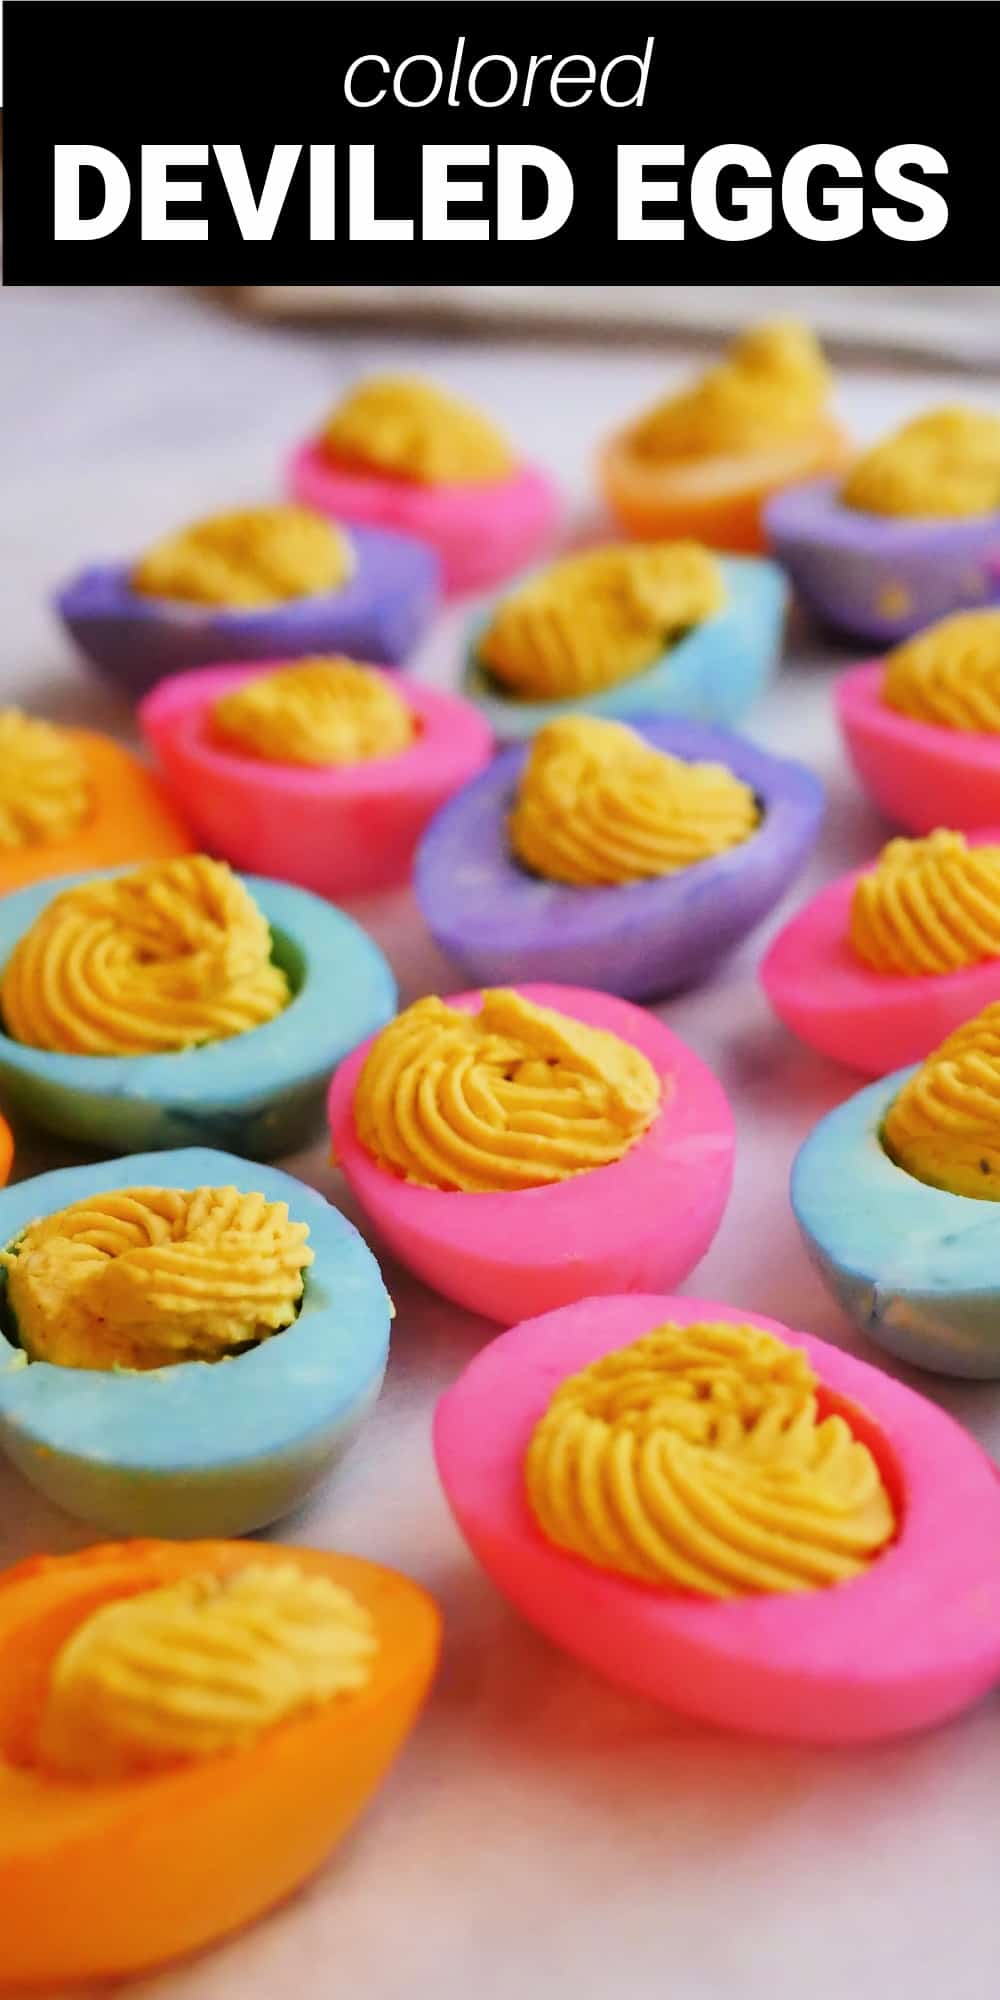 Dyed deviled eggs are a colorful and fun way to make Easter deviled eggs. With simple food coloring you can dye the hard boiled egg whites to make the most beautiful deviled eggs for any occasion. 